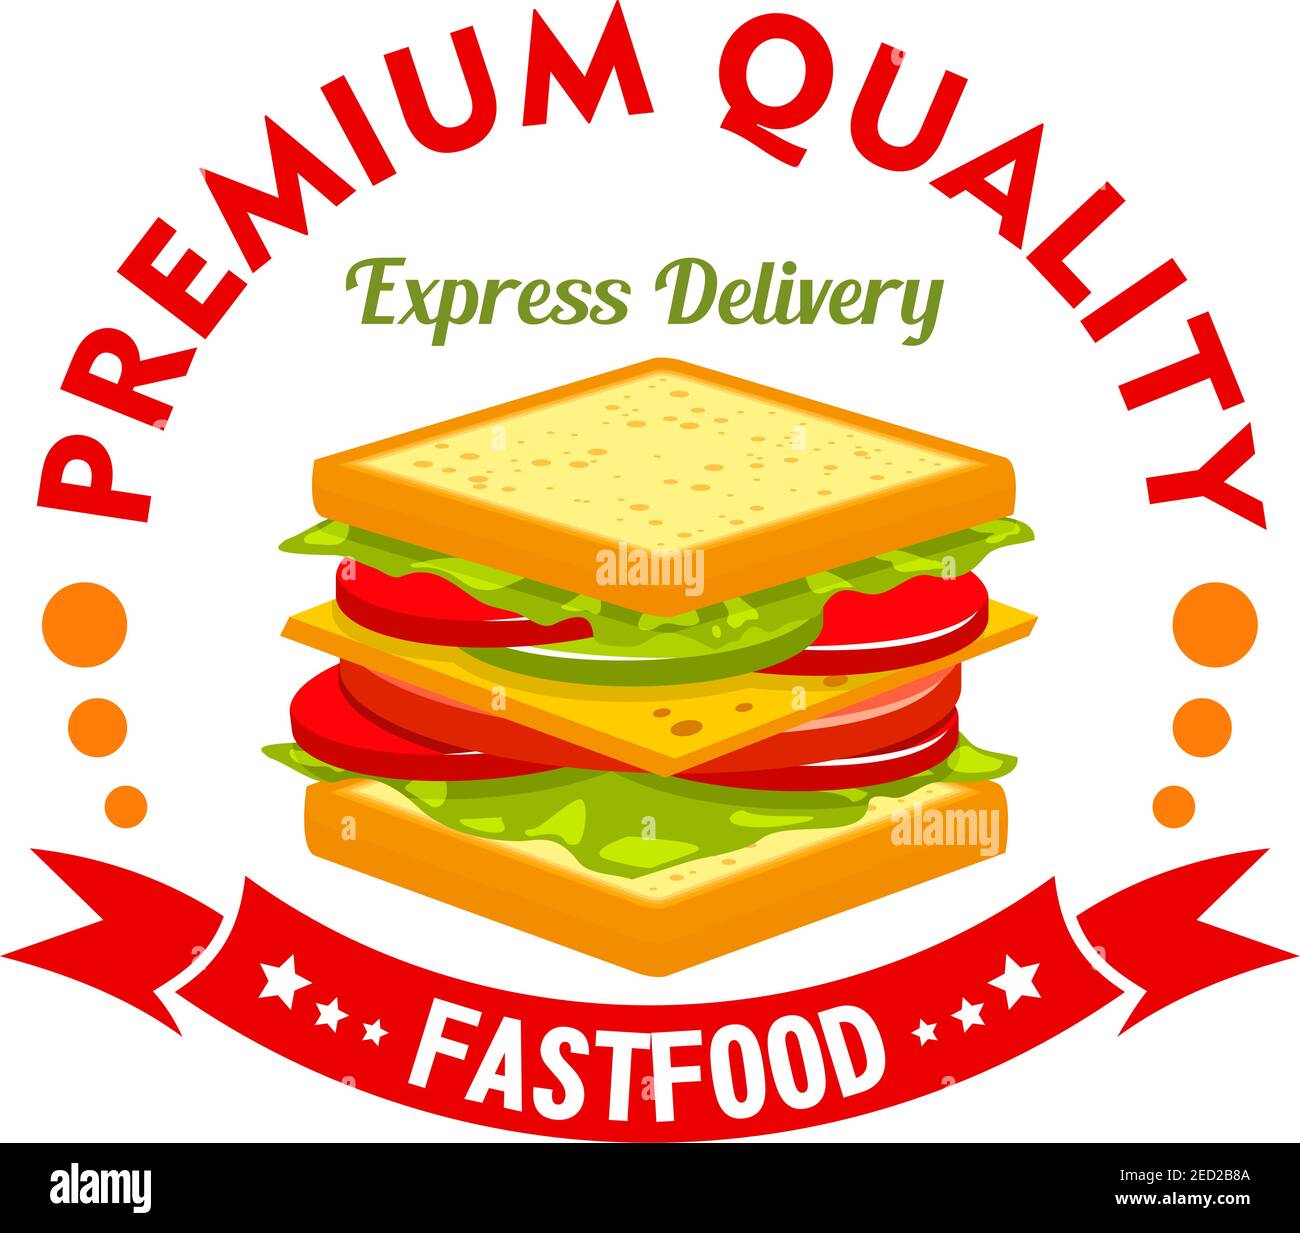 Fast food cafe and sandwich shop sign of ham and cheese sandwich with tomato, cucumber and lettuce, header Express Delivery and ribbon banner with sta Stock Vector